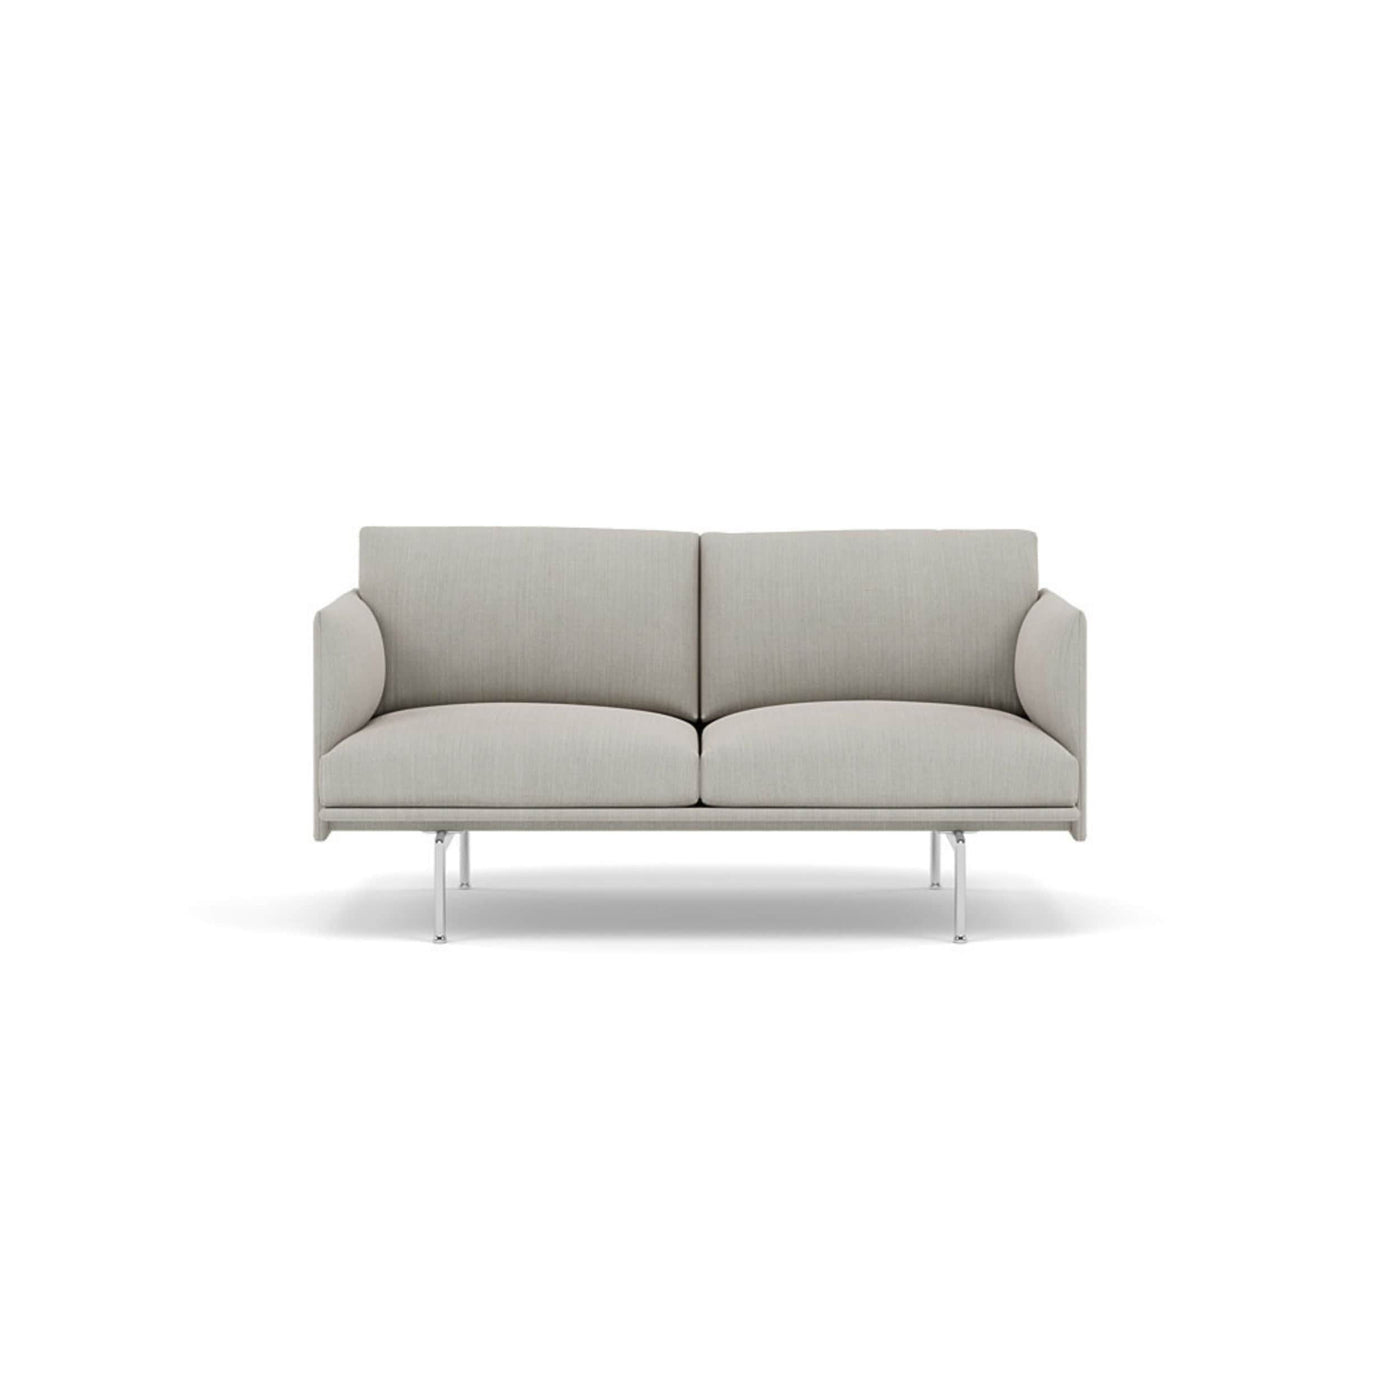 Muuto Outline Studio Sofa 140 polished aluminium legs. Made to order from someday designs. #colour_fiord-201